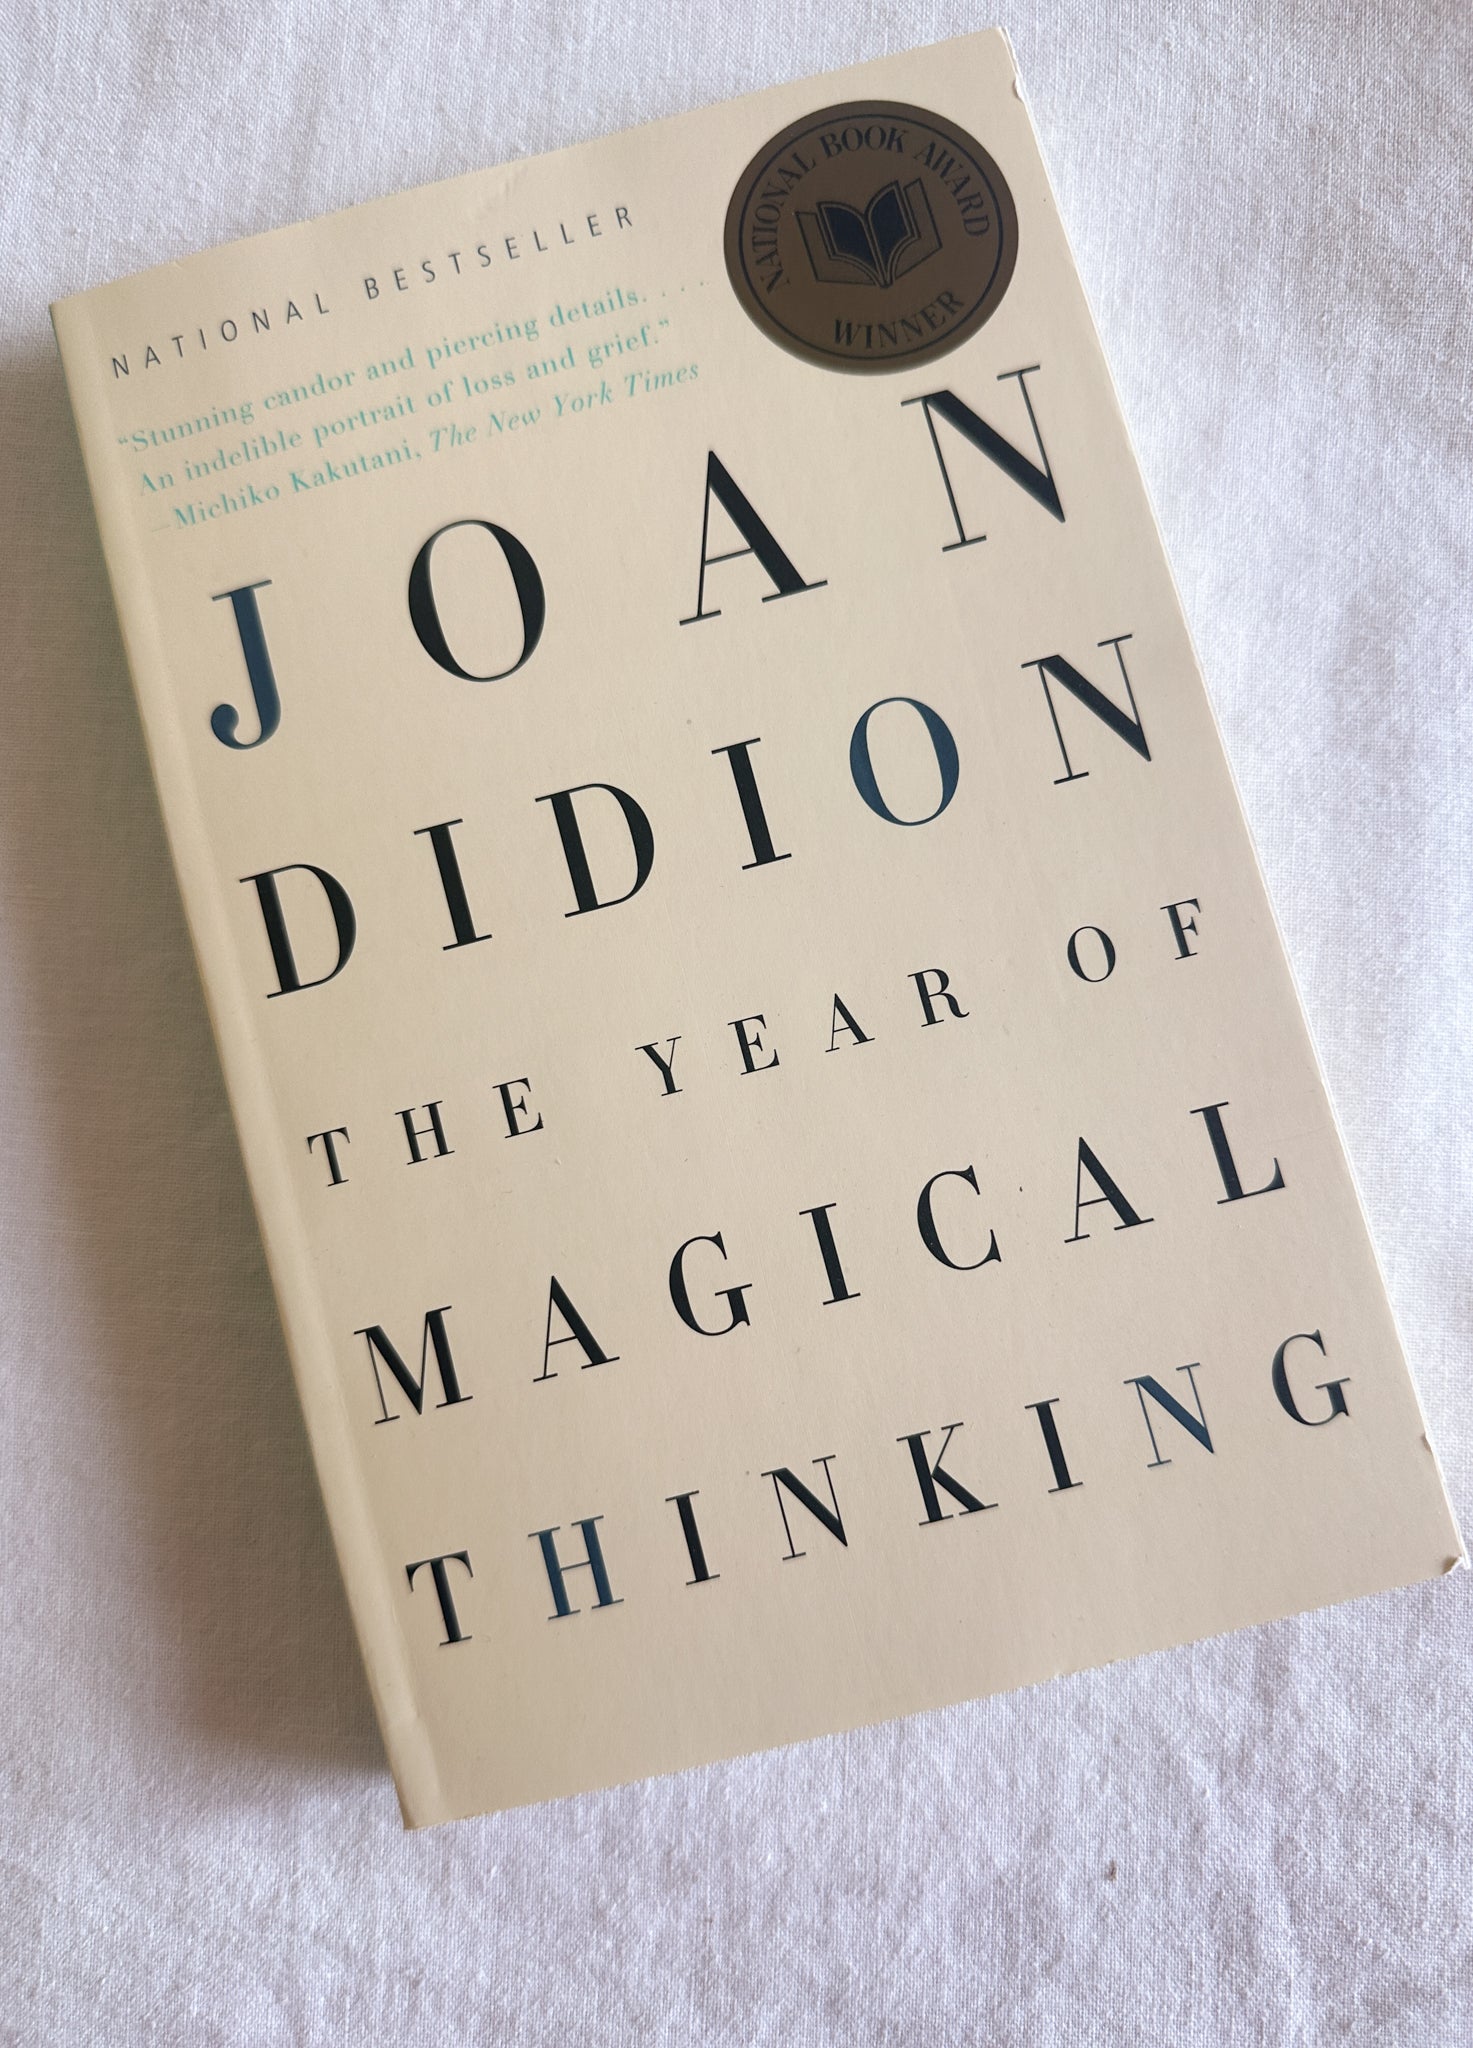 The Year of Magical Thinking Joan Didion